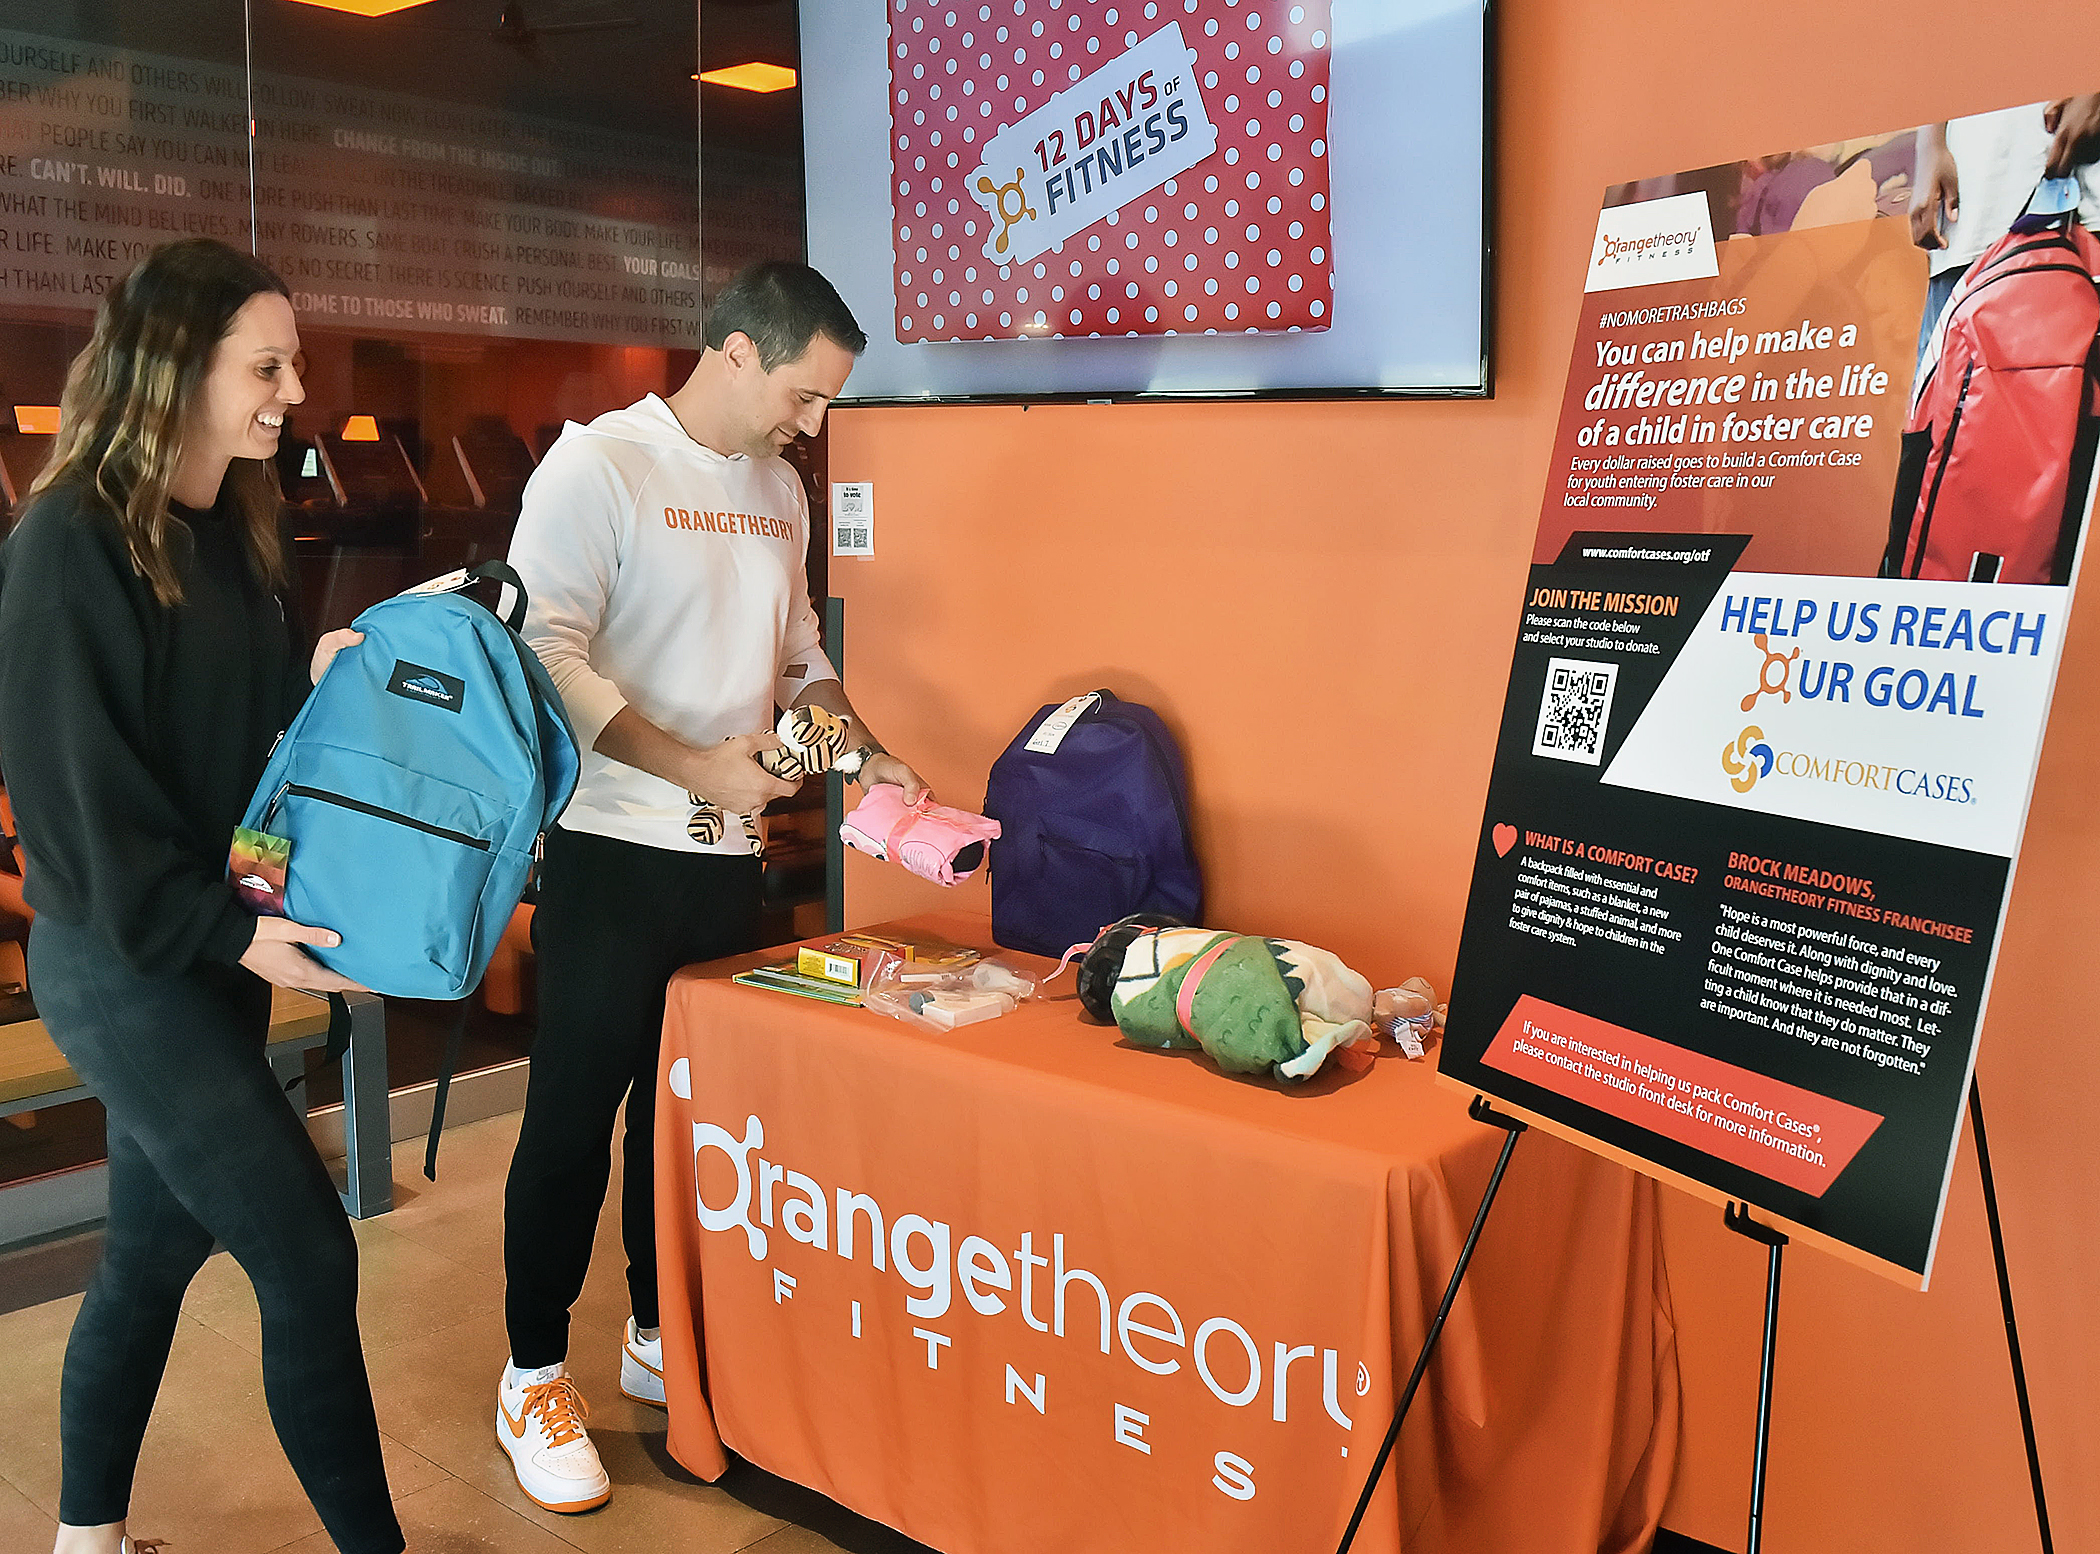 What Treadmill Does Orangetheory Use? Find Out Here!